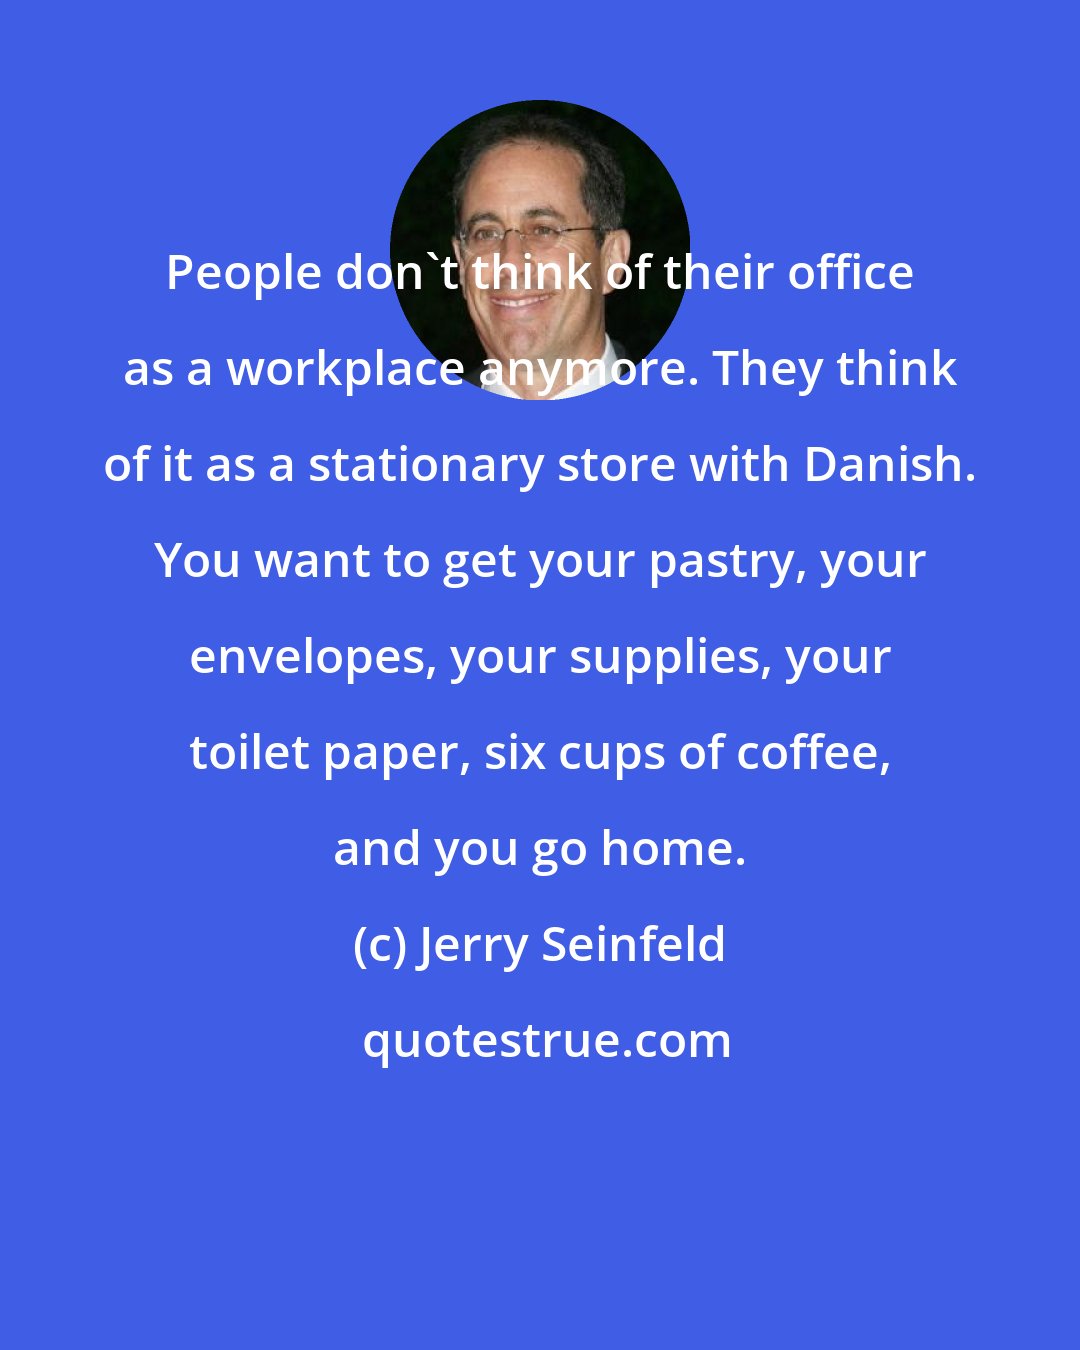 Jerry Seinfeld: People don't think of their office as a workplace anymore. They think of it as a stationary store with Danish. You want to get your pastry, your envelopes, your supplies, your toilet paper, six cups of coffee, and you go home.